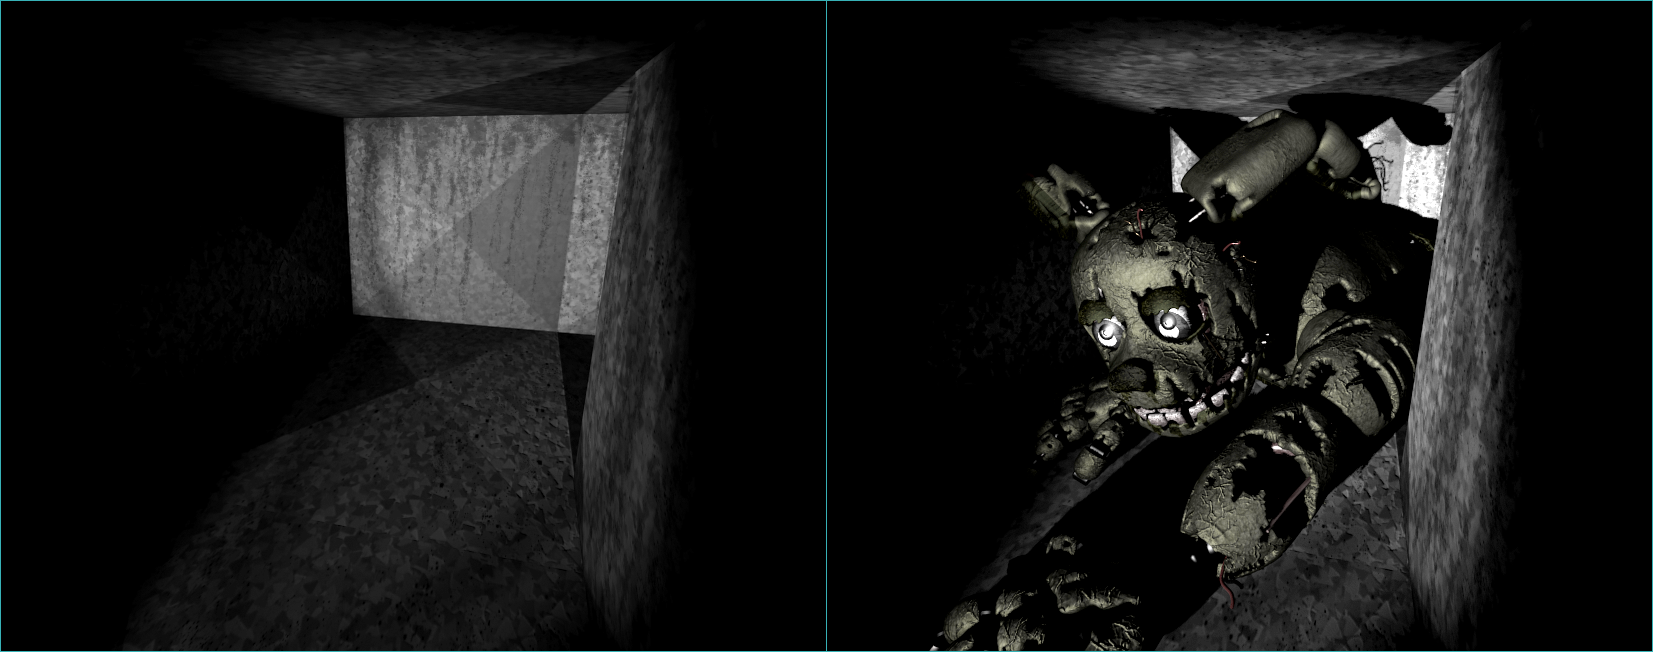 PC / Computer - Five Nights at Freddy's 2 - Vents - The Spriters Resource